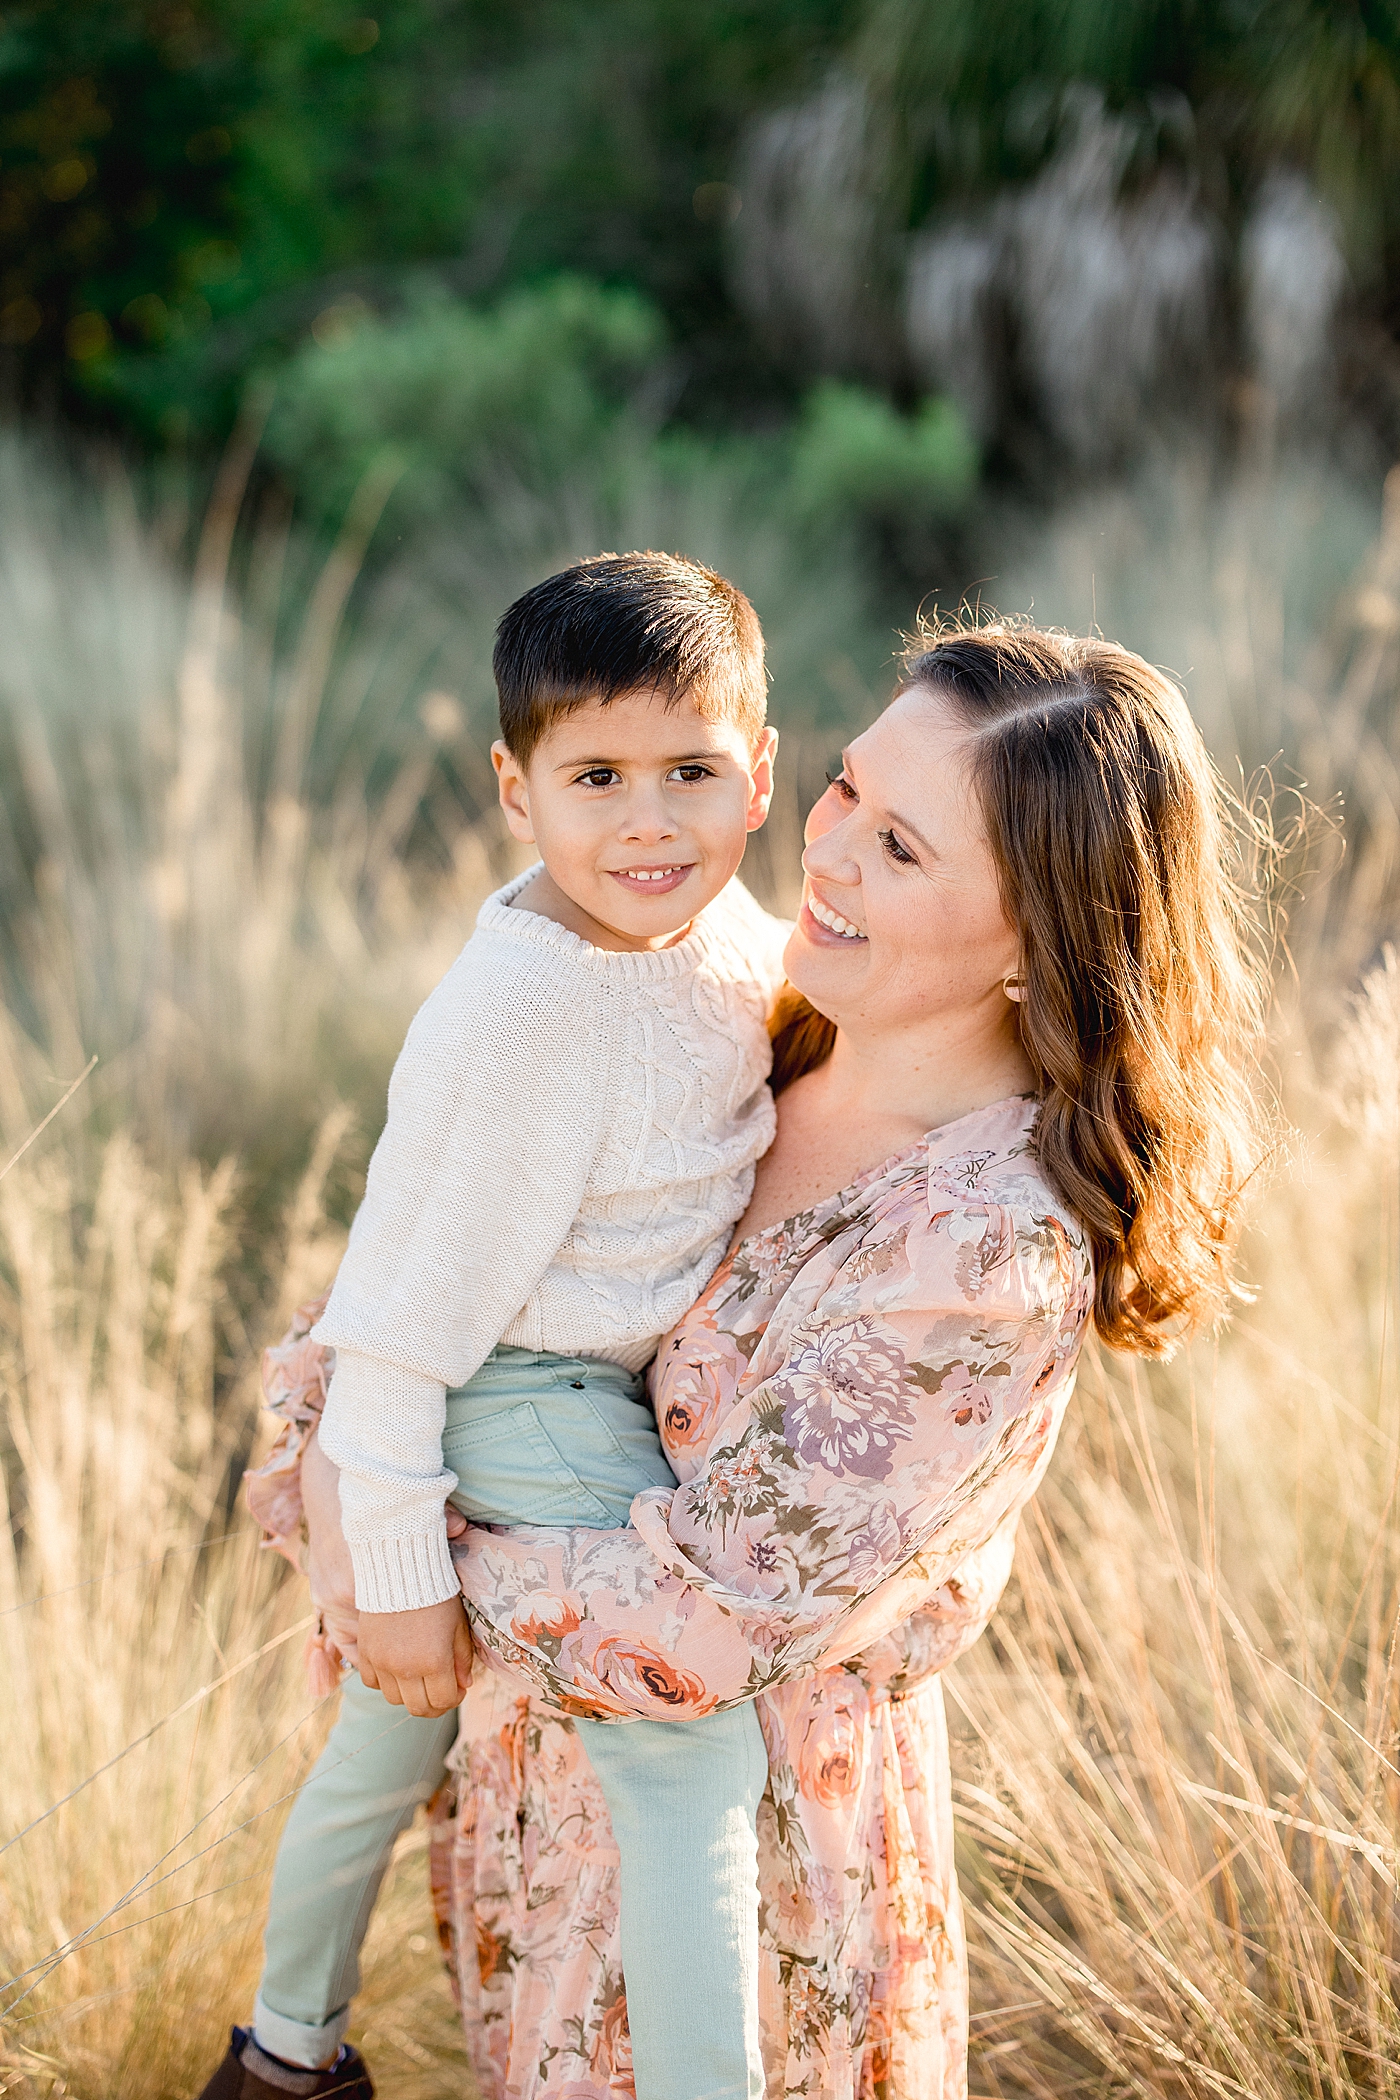 Sunset photoshoot with Mom and young son. Photos by Brittany Elise Photography.